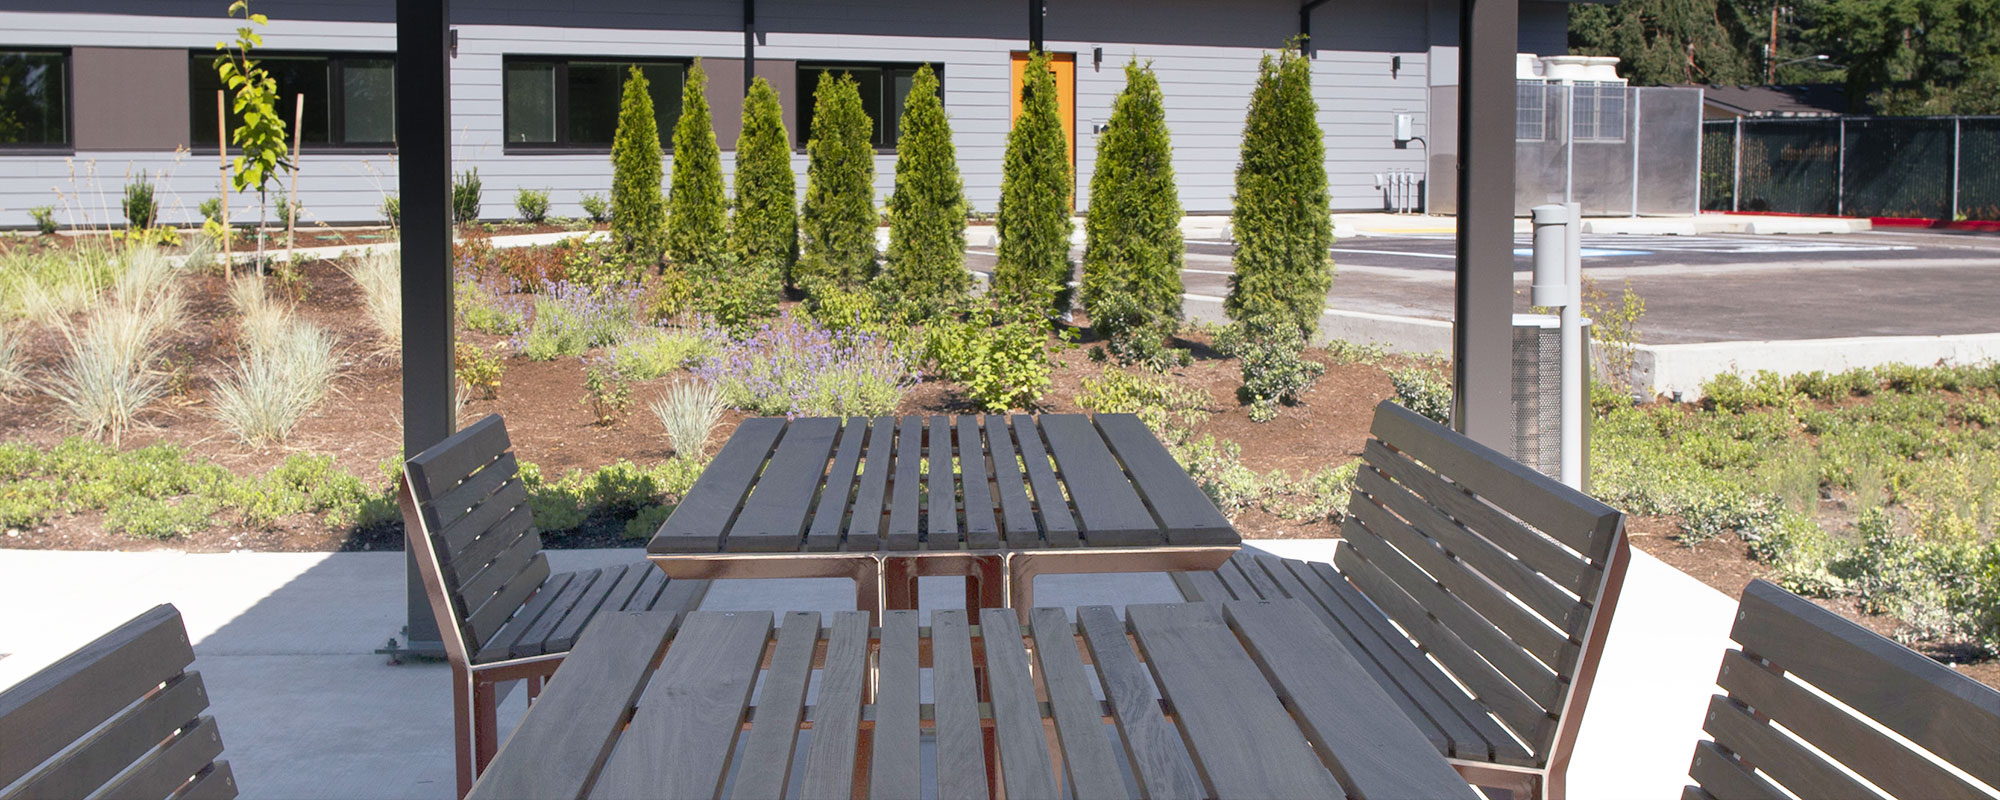 Covered tables and seats outside of the Tukwila Springs building